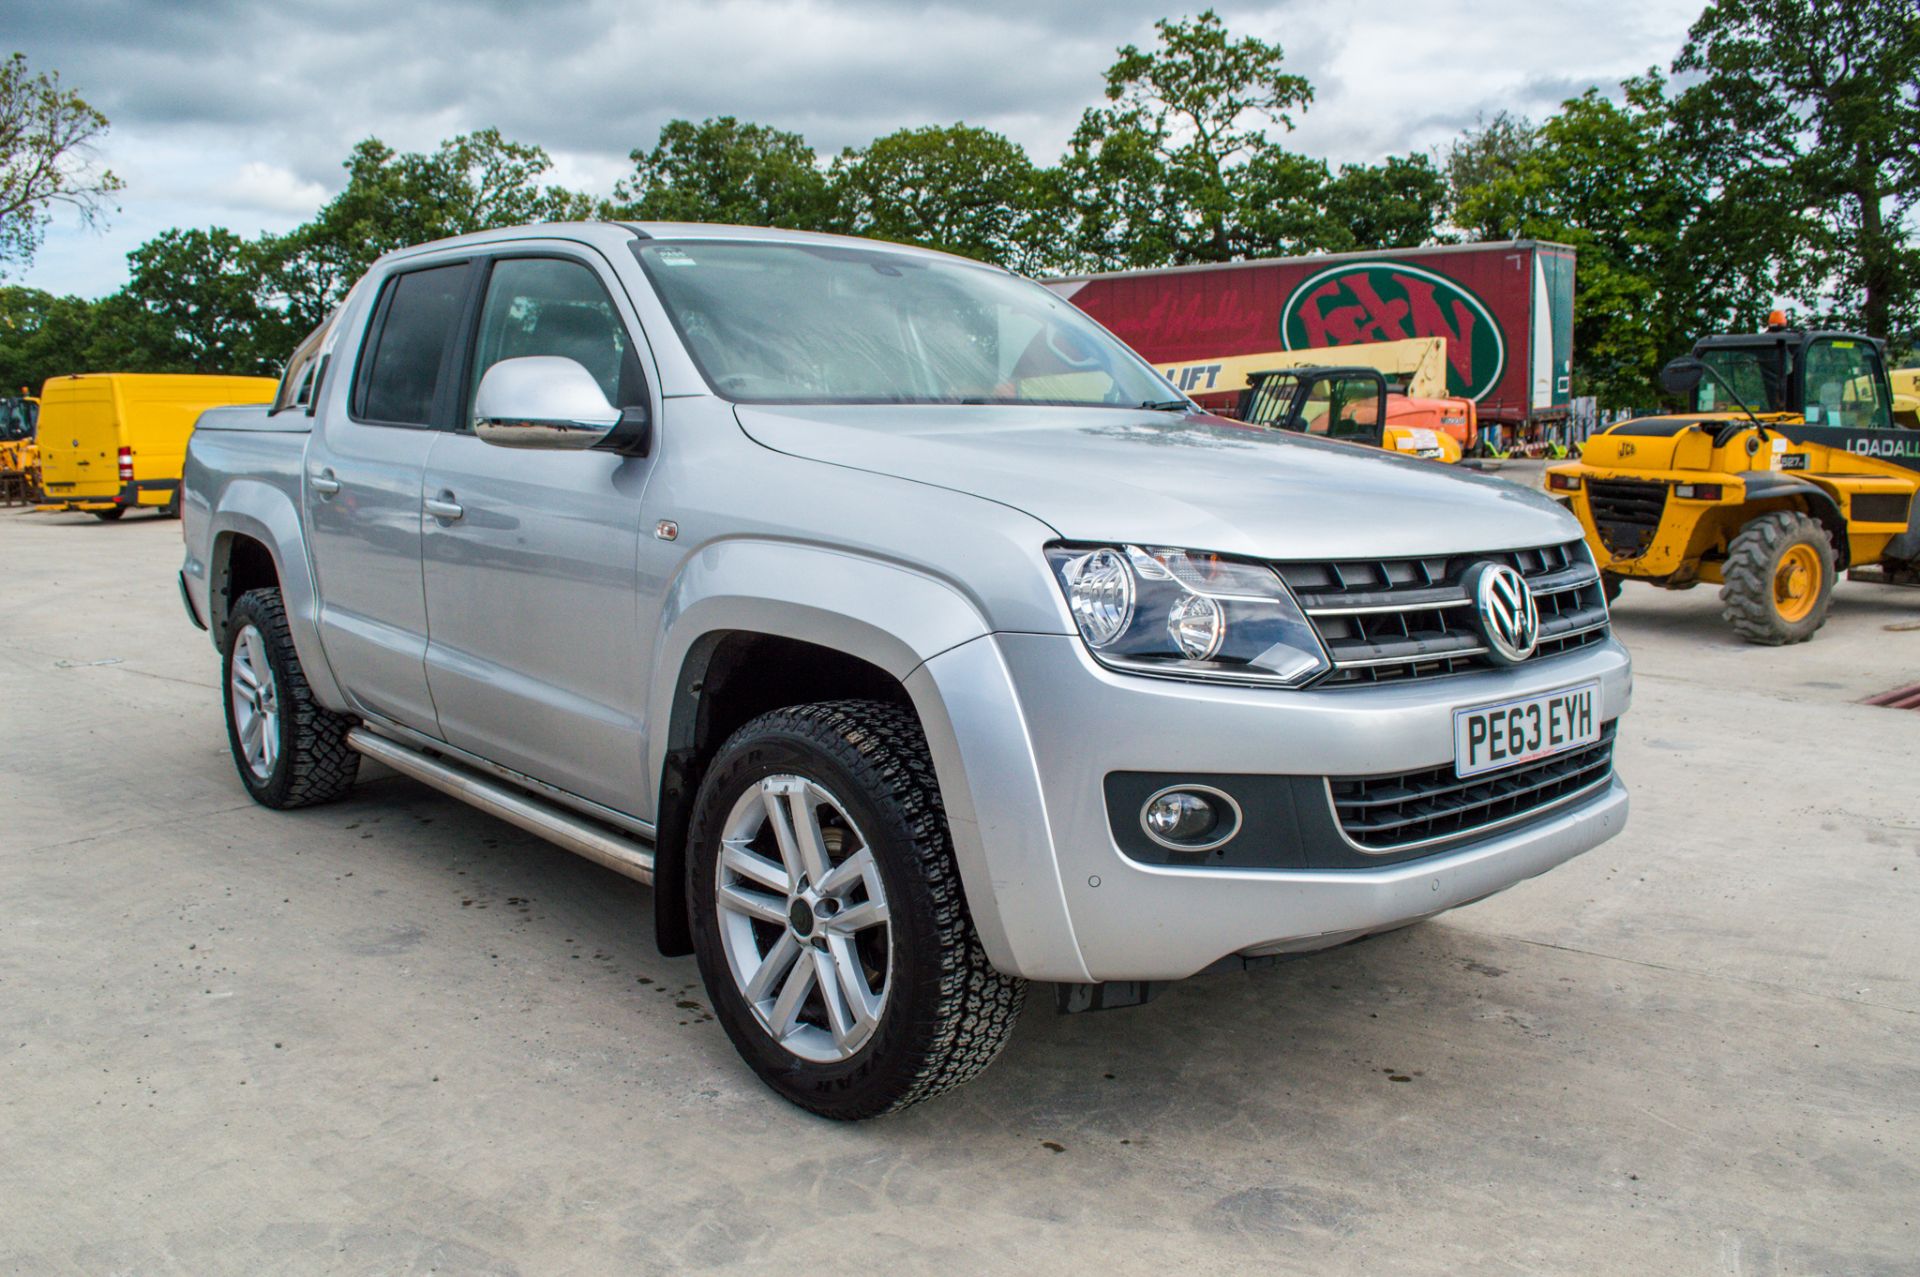 Volkswagen Amarok 2.0 TDI highline 4wd automatic double cab pick up Reg No: PE63 EYH Date of - Image 2 of 30